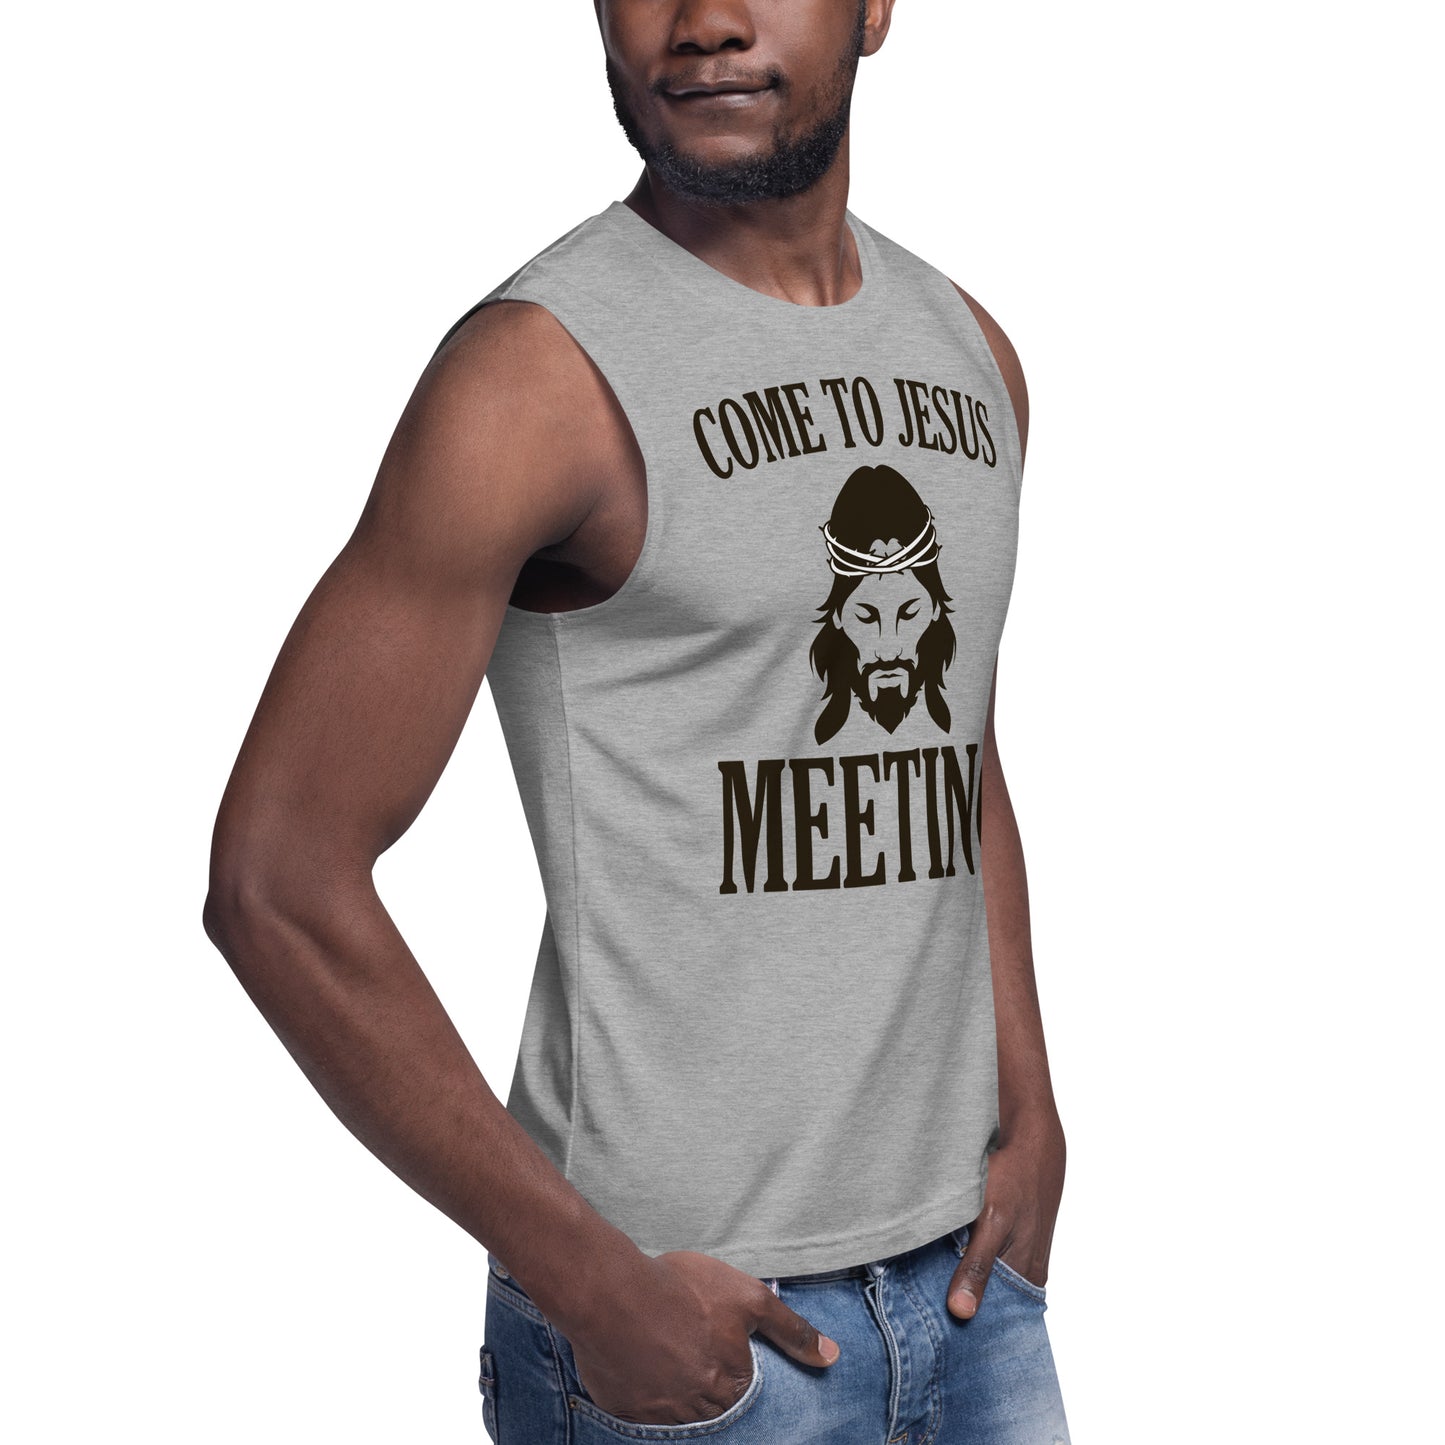 Come to Jesus Meeting / Unisex Muscle Shirt